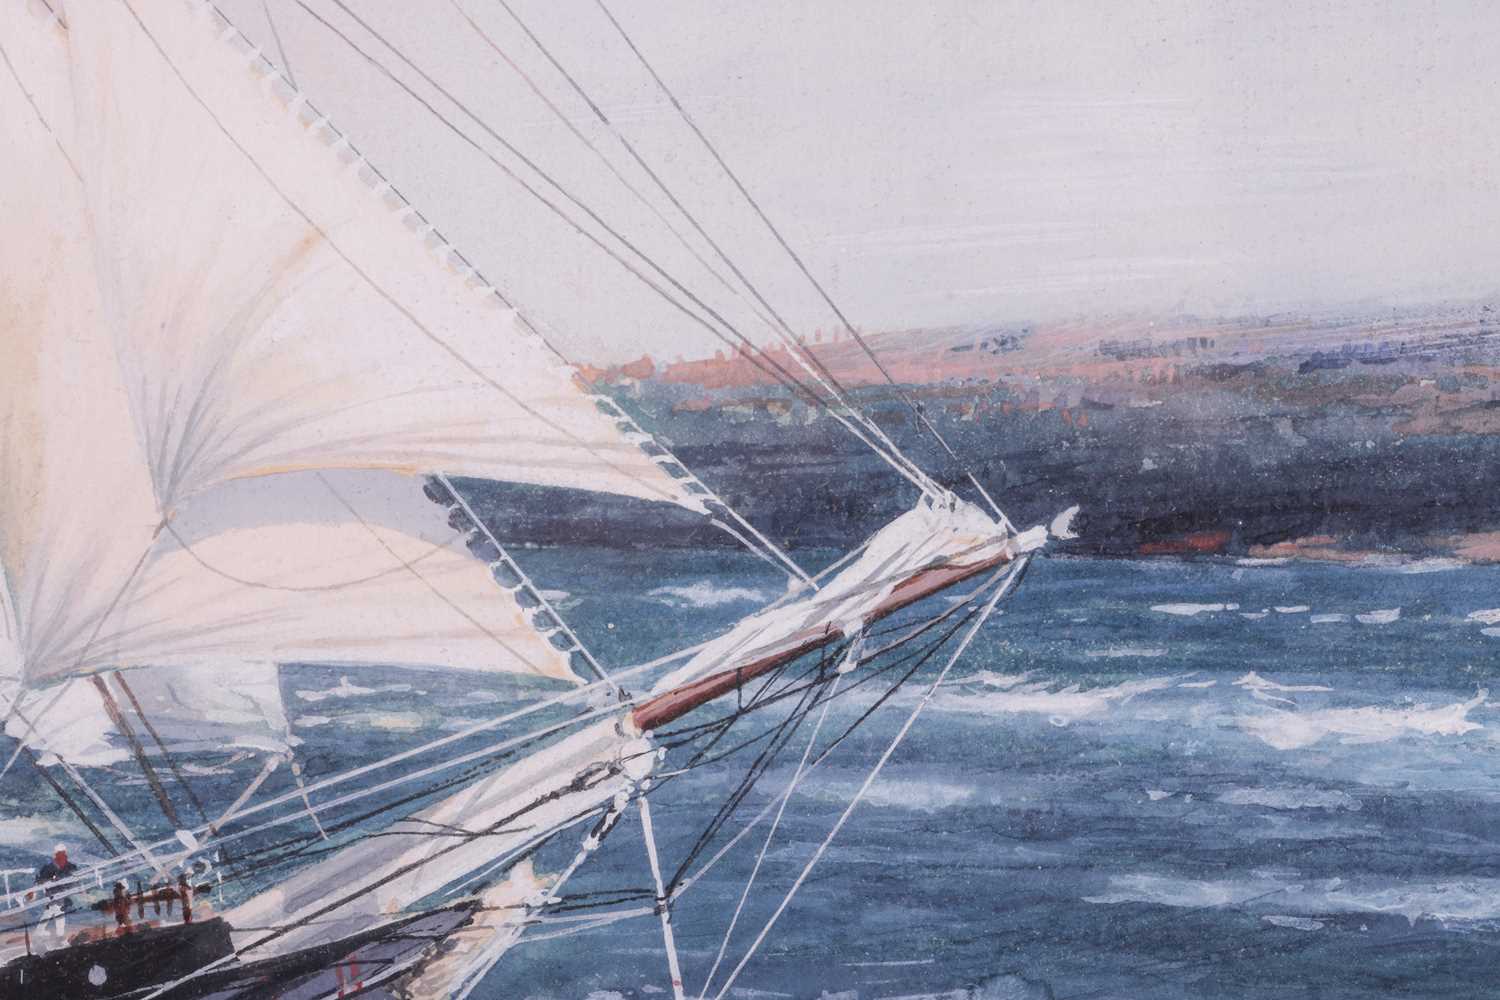 Jack Spurling (British, 1871-1933), the clipper "Port Jackson" running along a coastline with topsai - Image 6 of 10